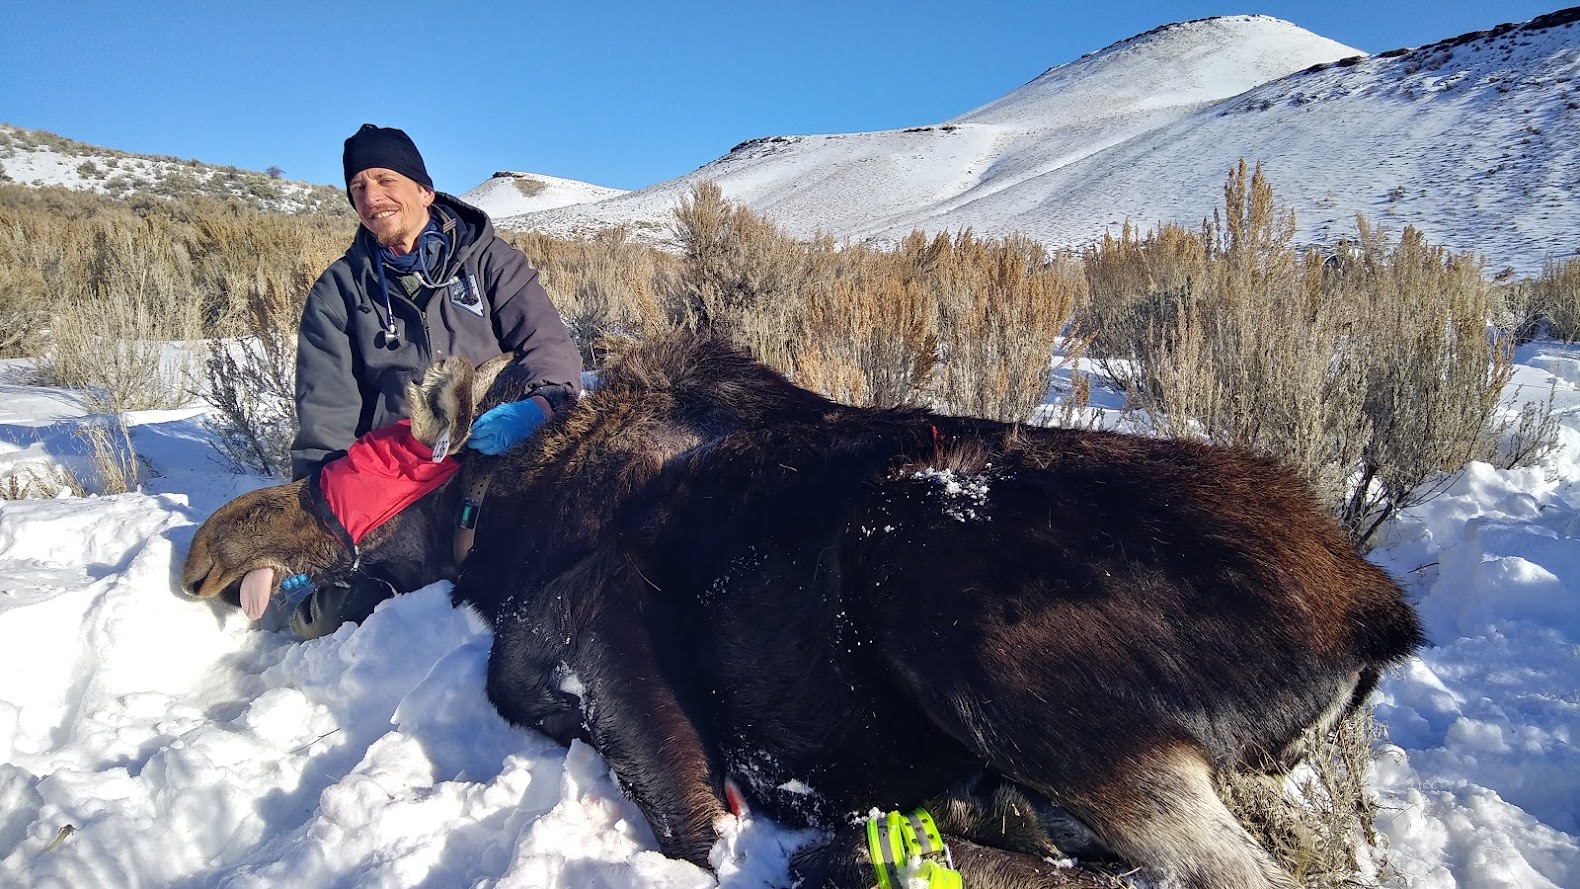 Dr. Nate LaHue with first moose captured in Nevada history.